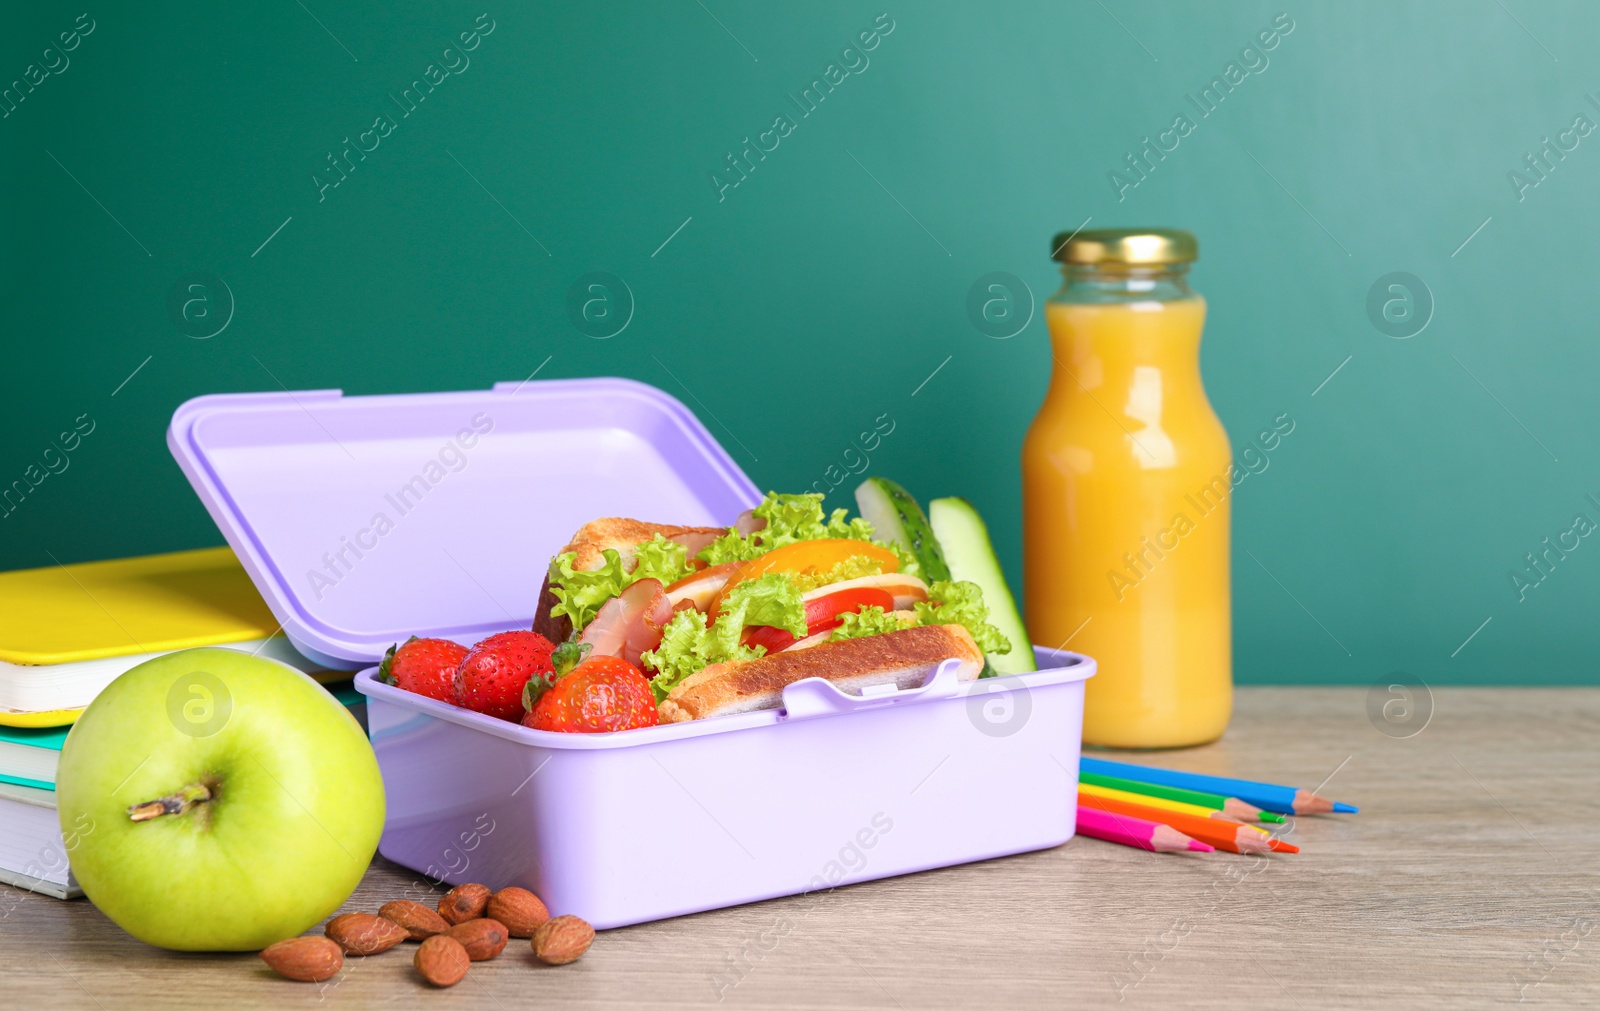 Photo of Lunch box with healthy food and different stationery on wooden table near green chalkboard